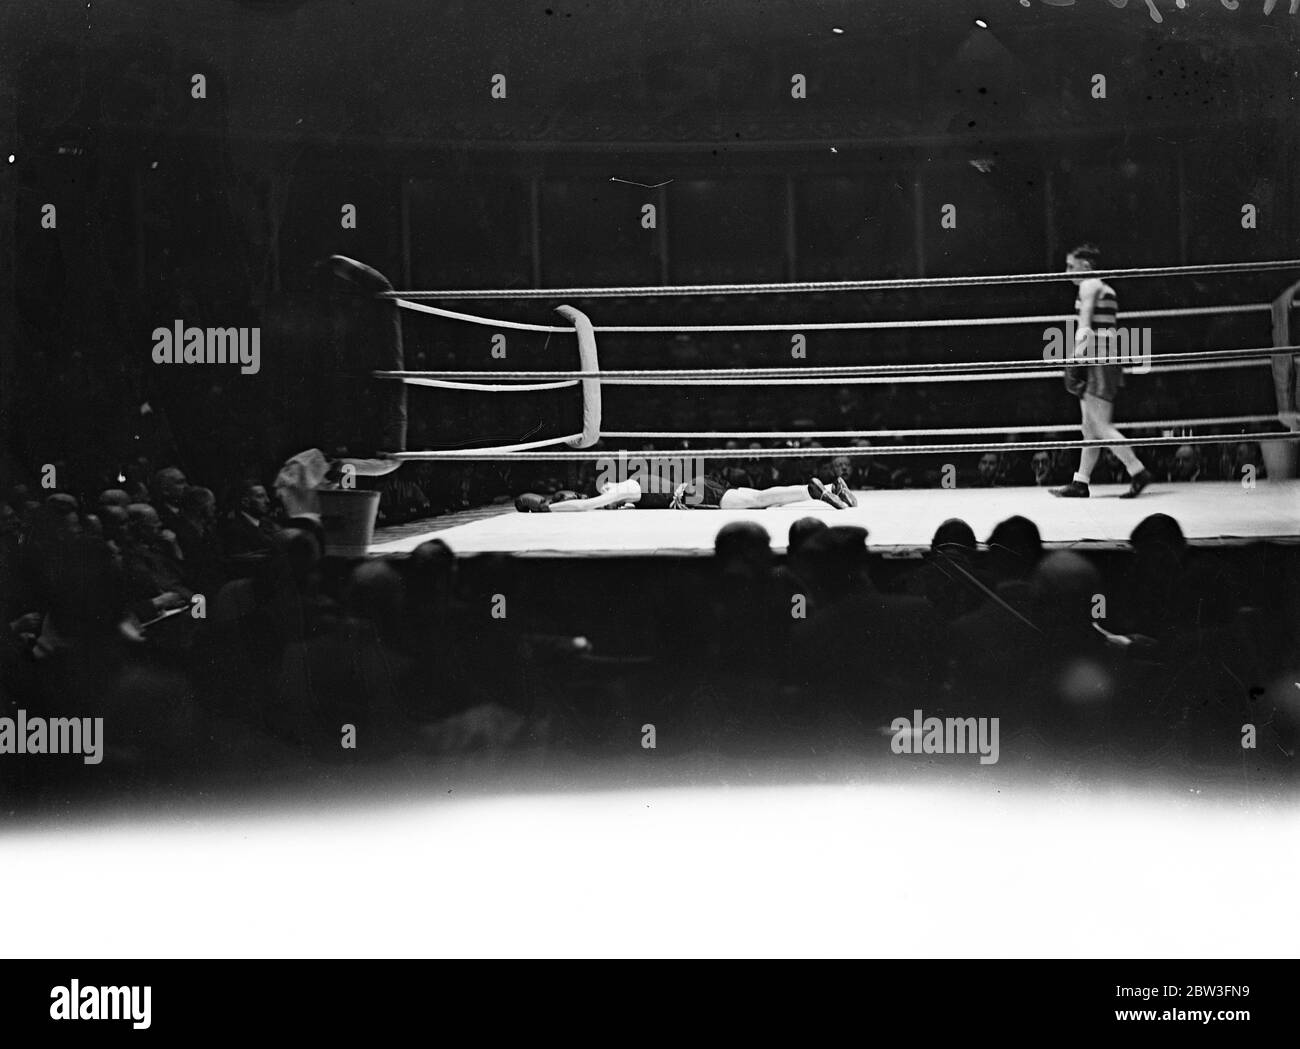 Amateur boxing Black and White Stock Photos and Images image